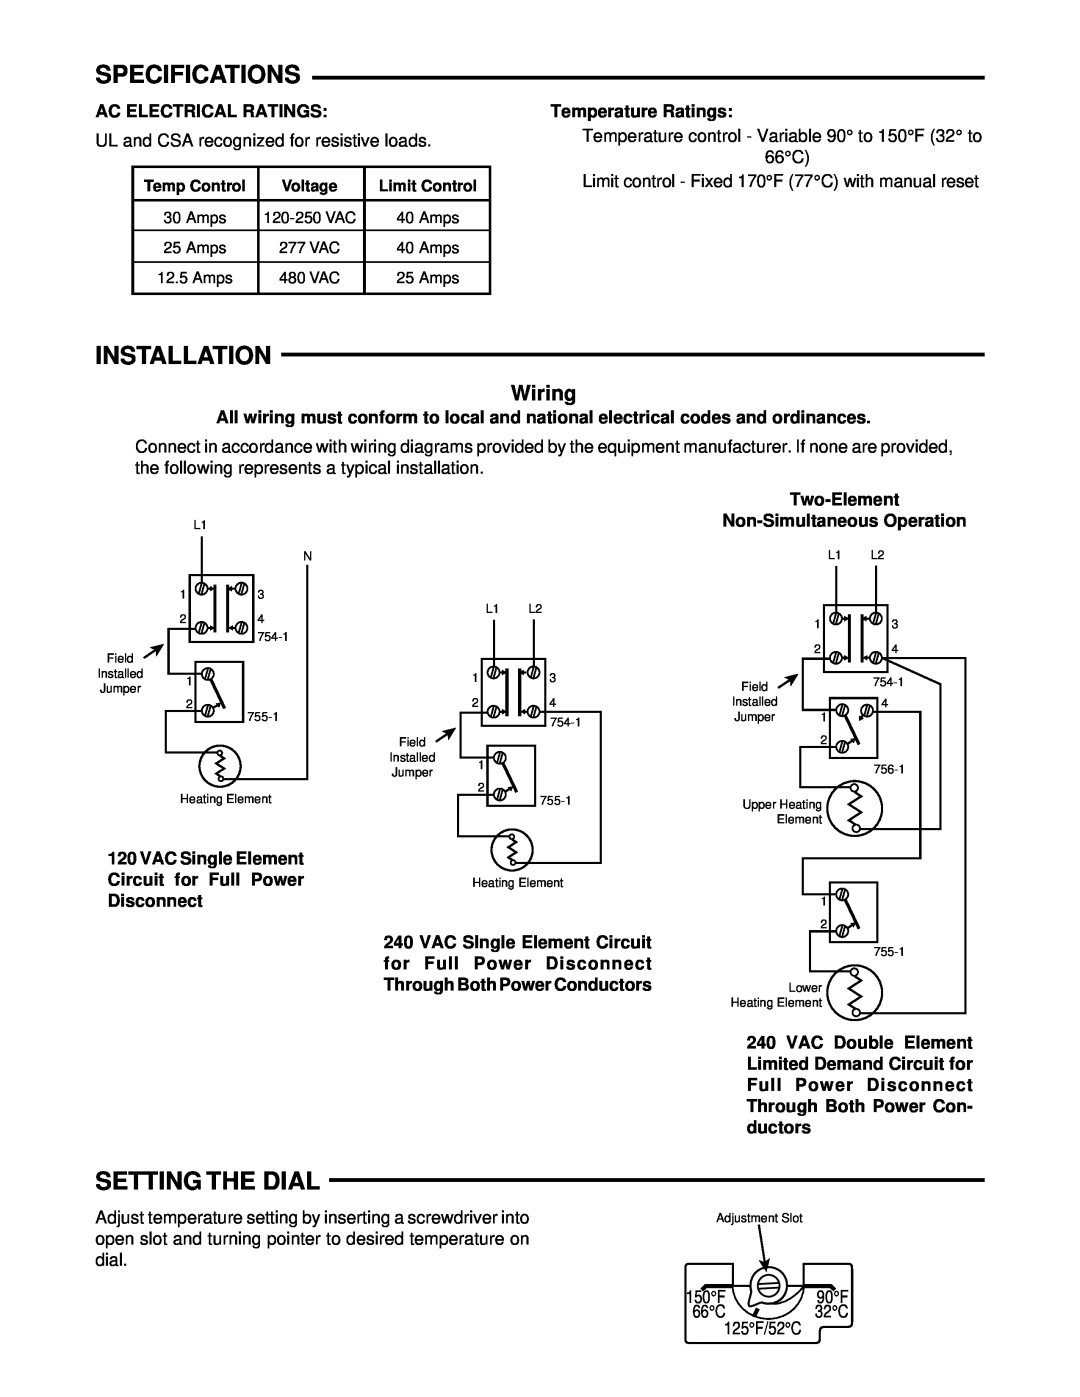 White Rodgers 754-1, 756-1, 755-1 installation instructions Specifications, Installation, Setting The Dial, Wiring 